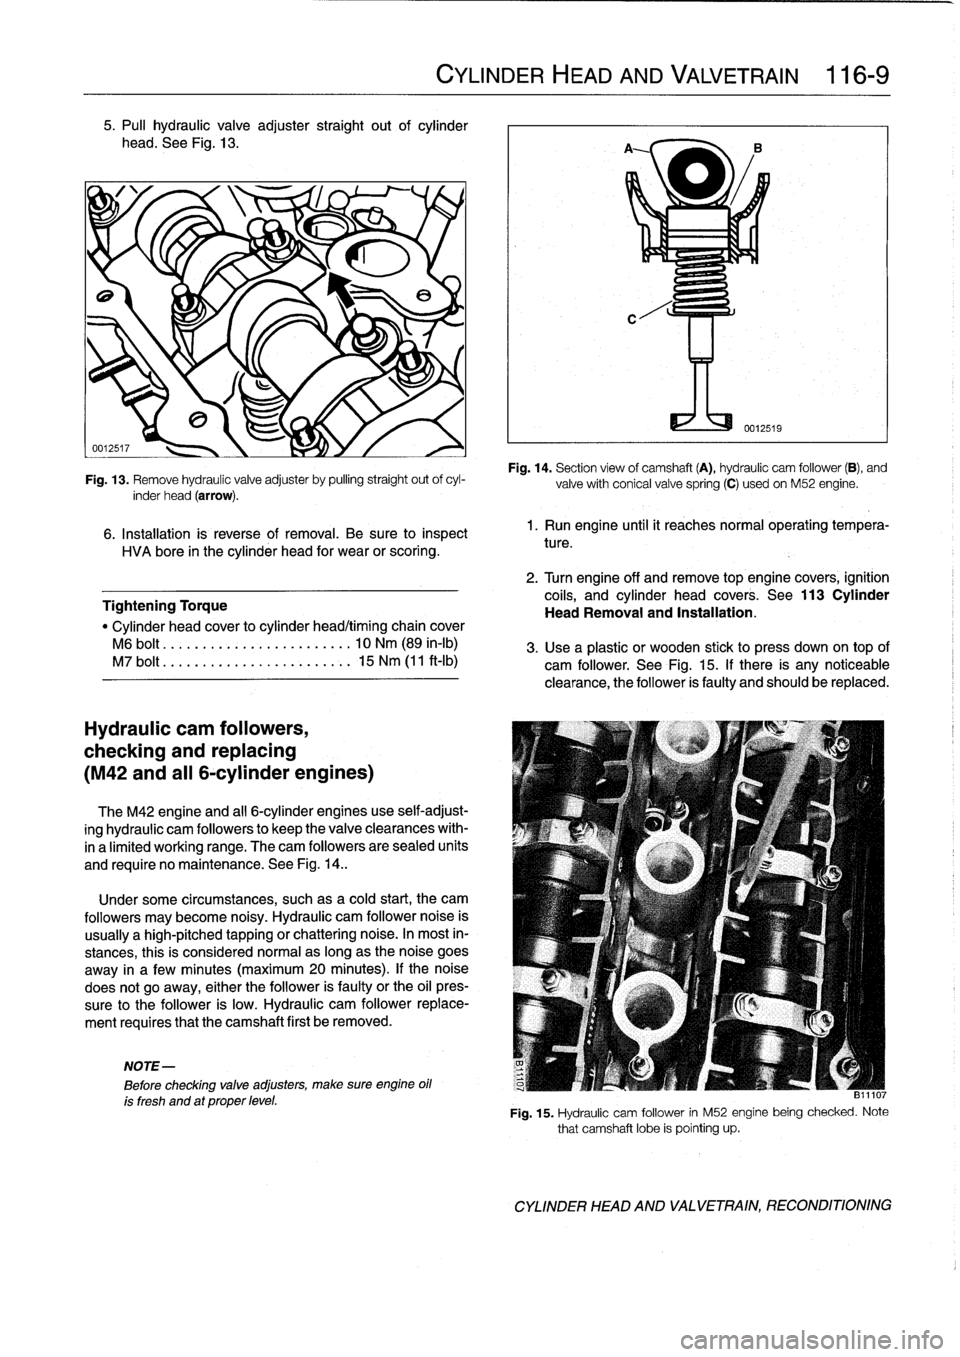 BMW 328i 1997 E36 User Guide 5
.
Pull
hydraulic
valve
adjuster
straight
out
of
cylinder

head
.
See
Fig
.
13
.

Fig
.
13
.
Remove
hydraulic
valve
adjuster
by
pulling
straight
out
ofcyl-
inder
head
(arrow)
.

6
.
Installation
is
r